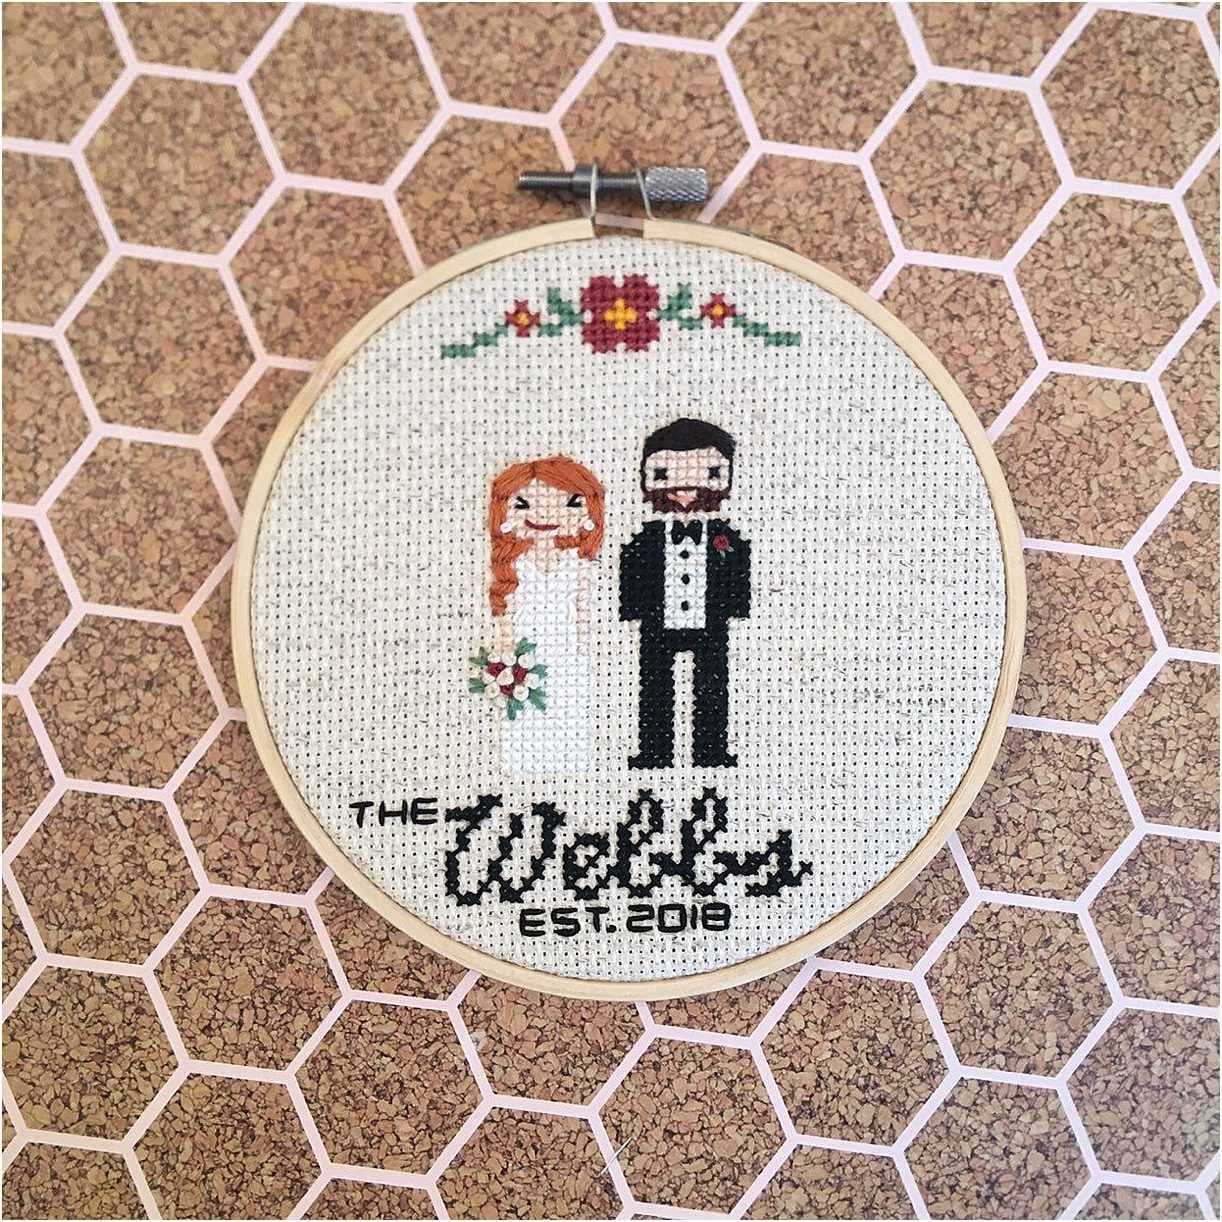 Personalized Gift Ideas for Newlyweds Couples | Hill City Bride Virginia Wedding Blog Cross Stitch